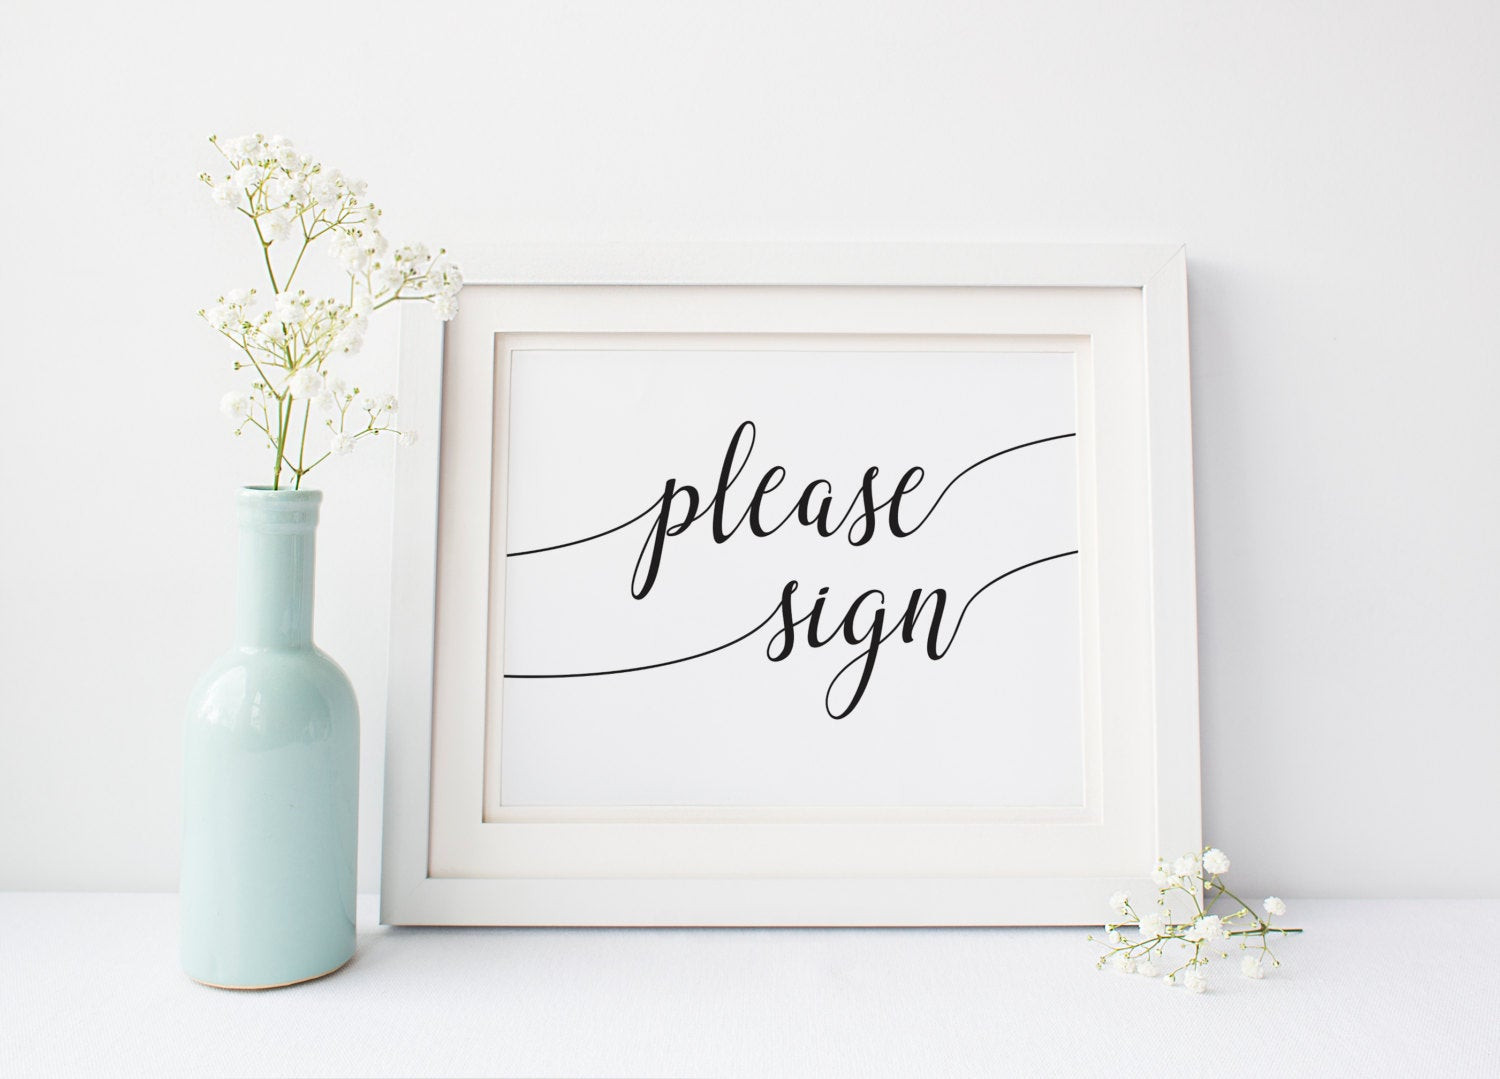 Signing Guest Book Wedding
 Wedding Guest Book Sign Please Sign Our Guestbook Wedding